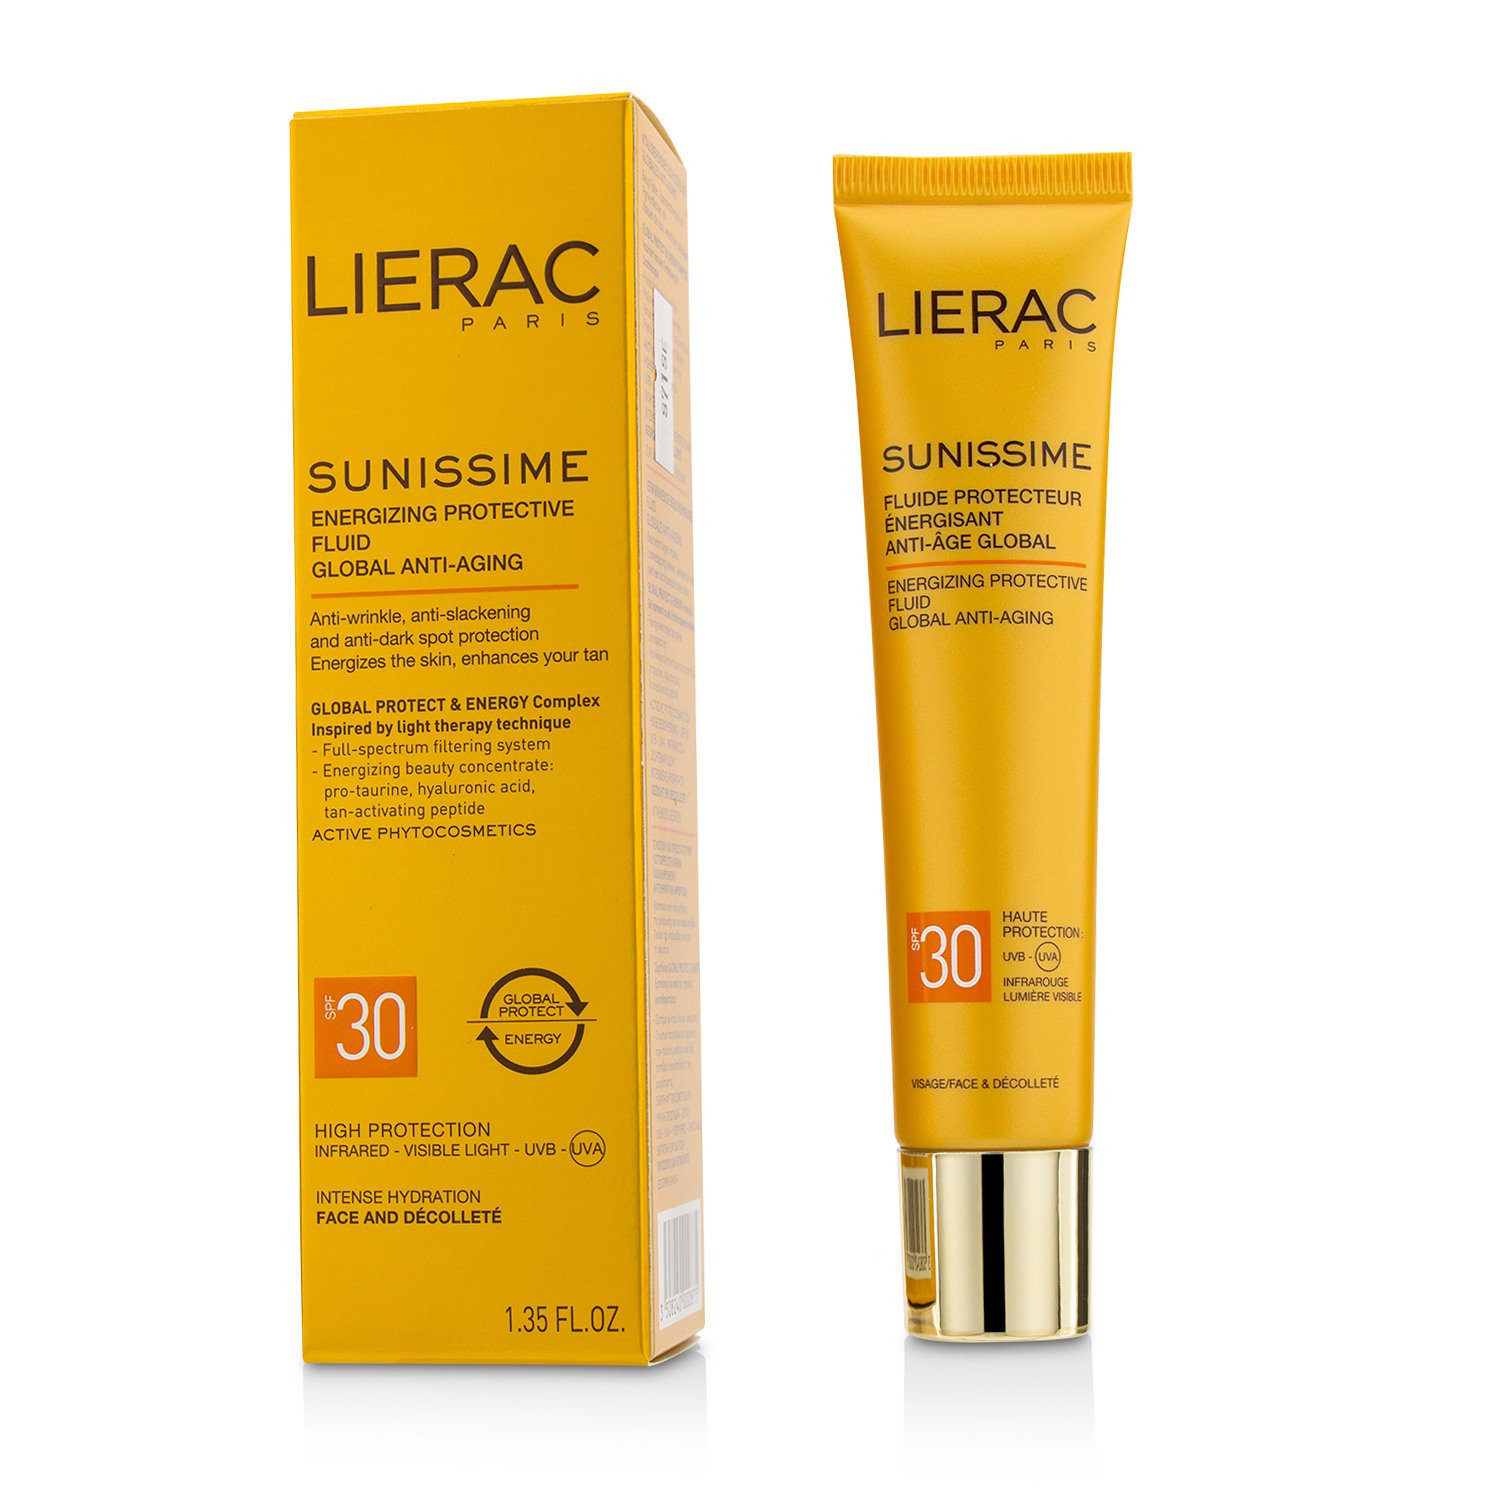 Sunissime Global Anti-Aging Energizing Protective Fluid SPF30  For Face & Decollete Lierac Image